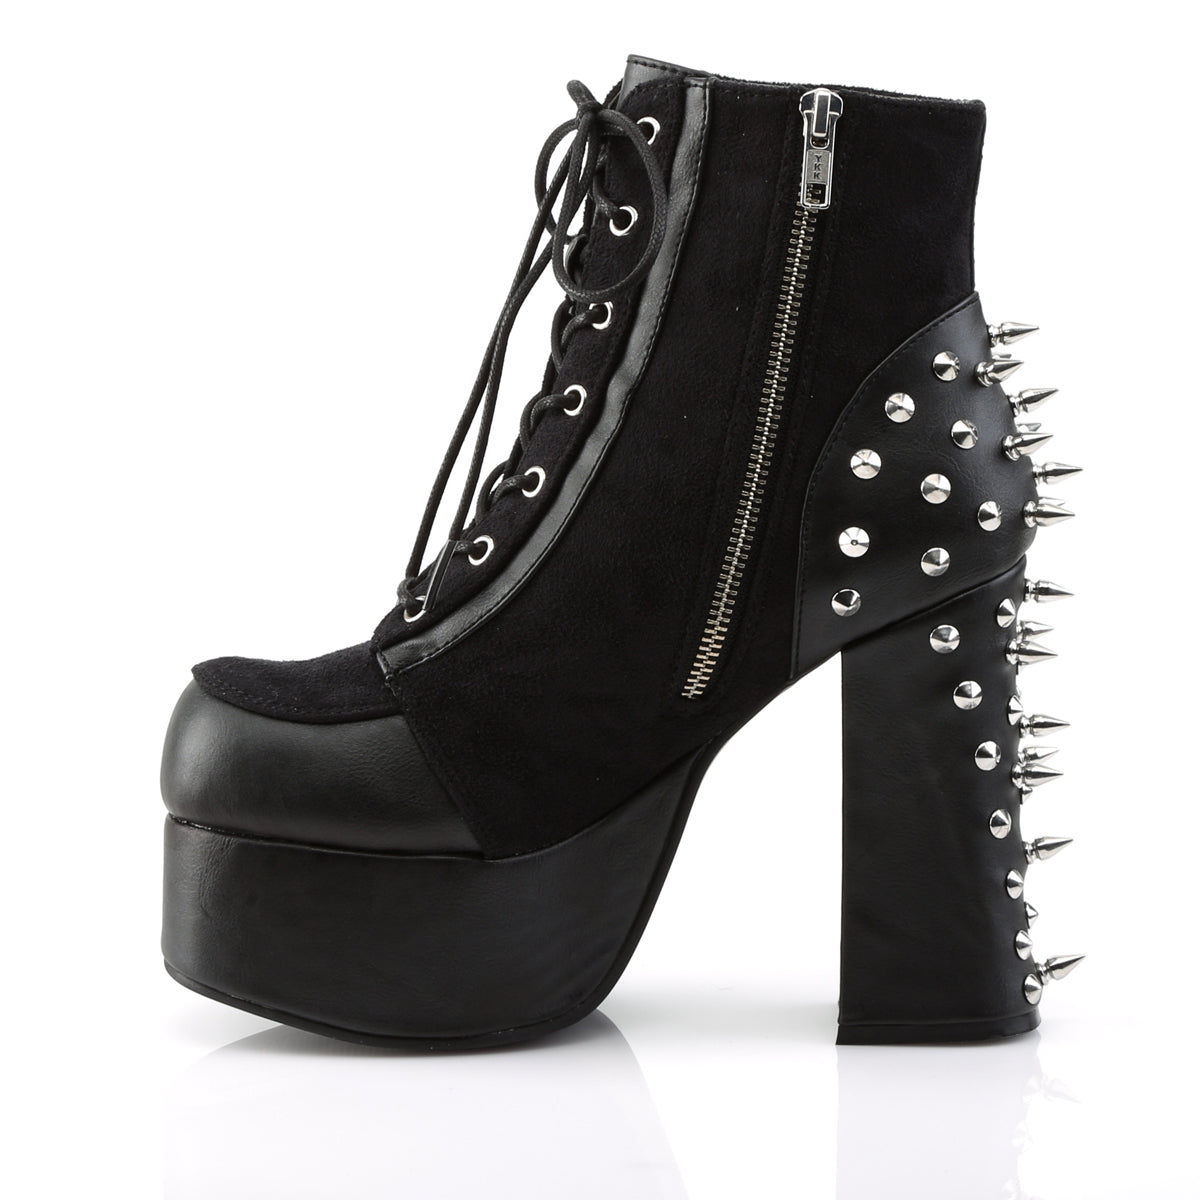 CHARADE-100 Black Vegan Leather-Suede Ankle Boot Demonia